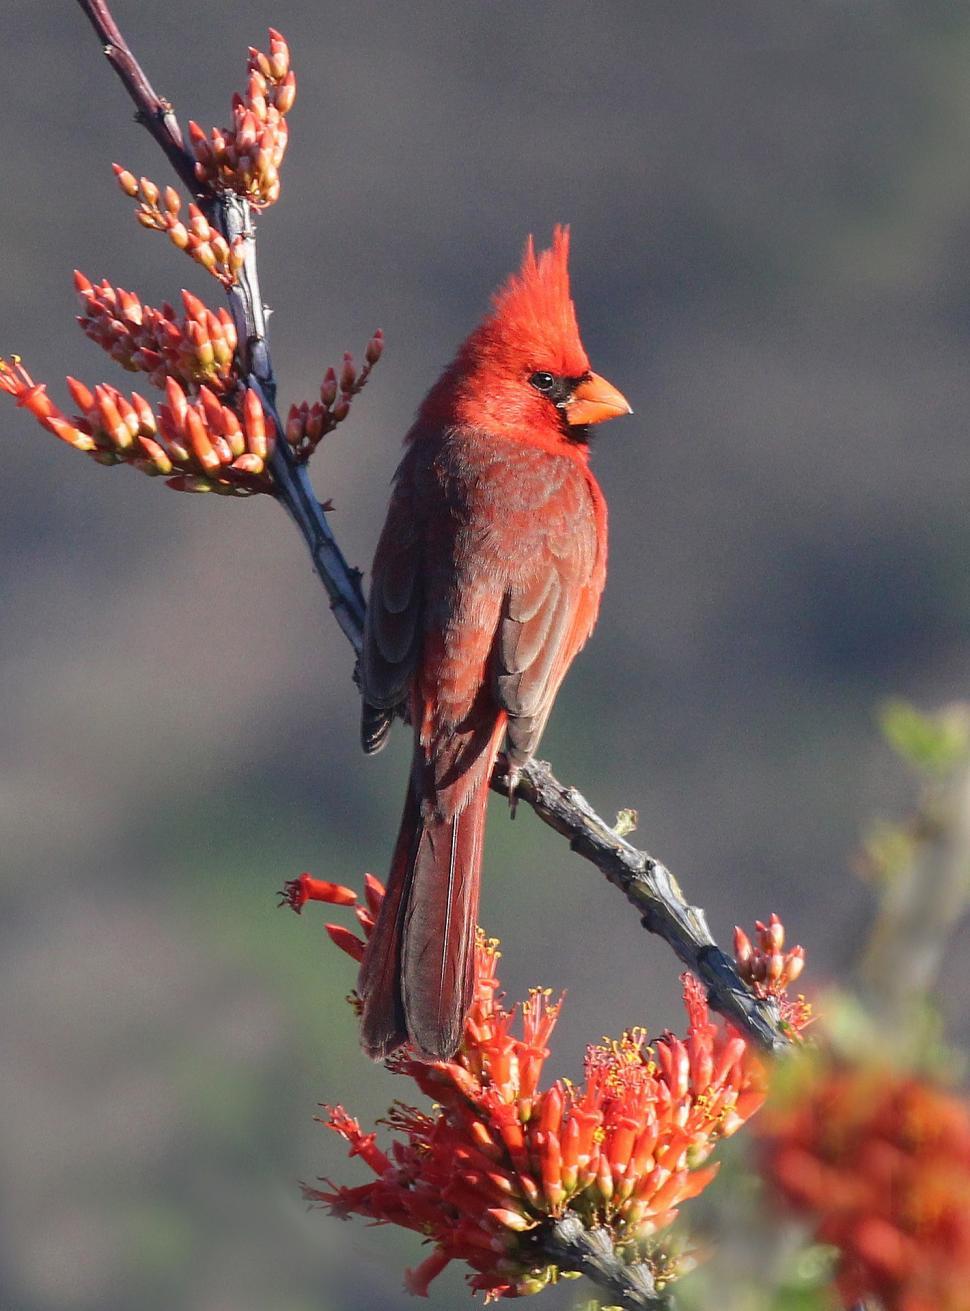 Free Image of Red Bird Perched on Tree Branch 